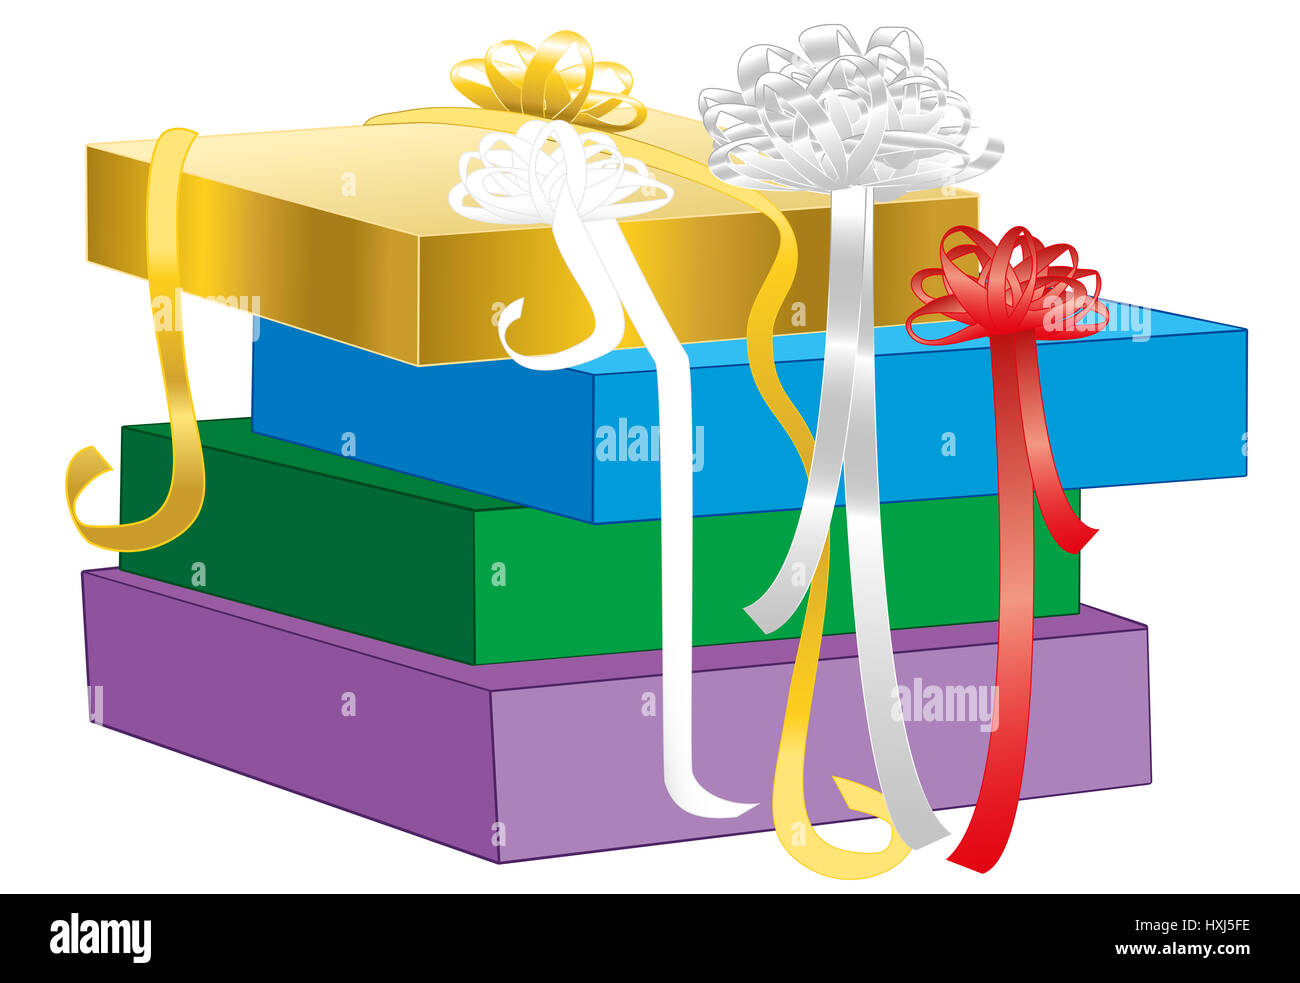 Gift wrapping - pile of unpacked gift boxes with ribbon bows in different colors. Isolated illustration on white background. Stock Photo